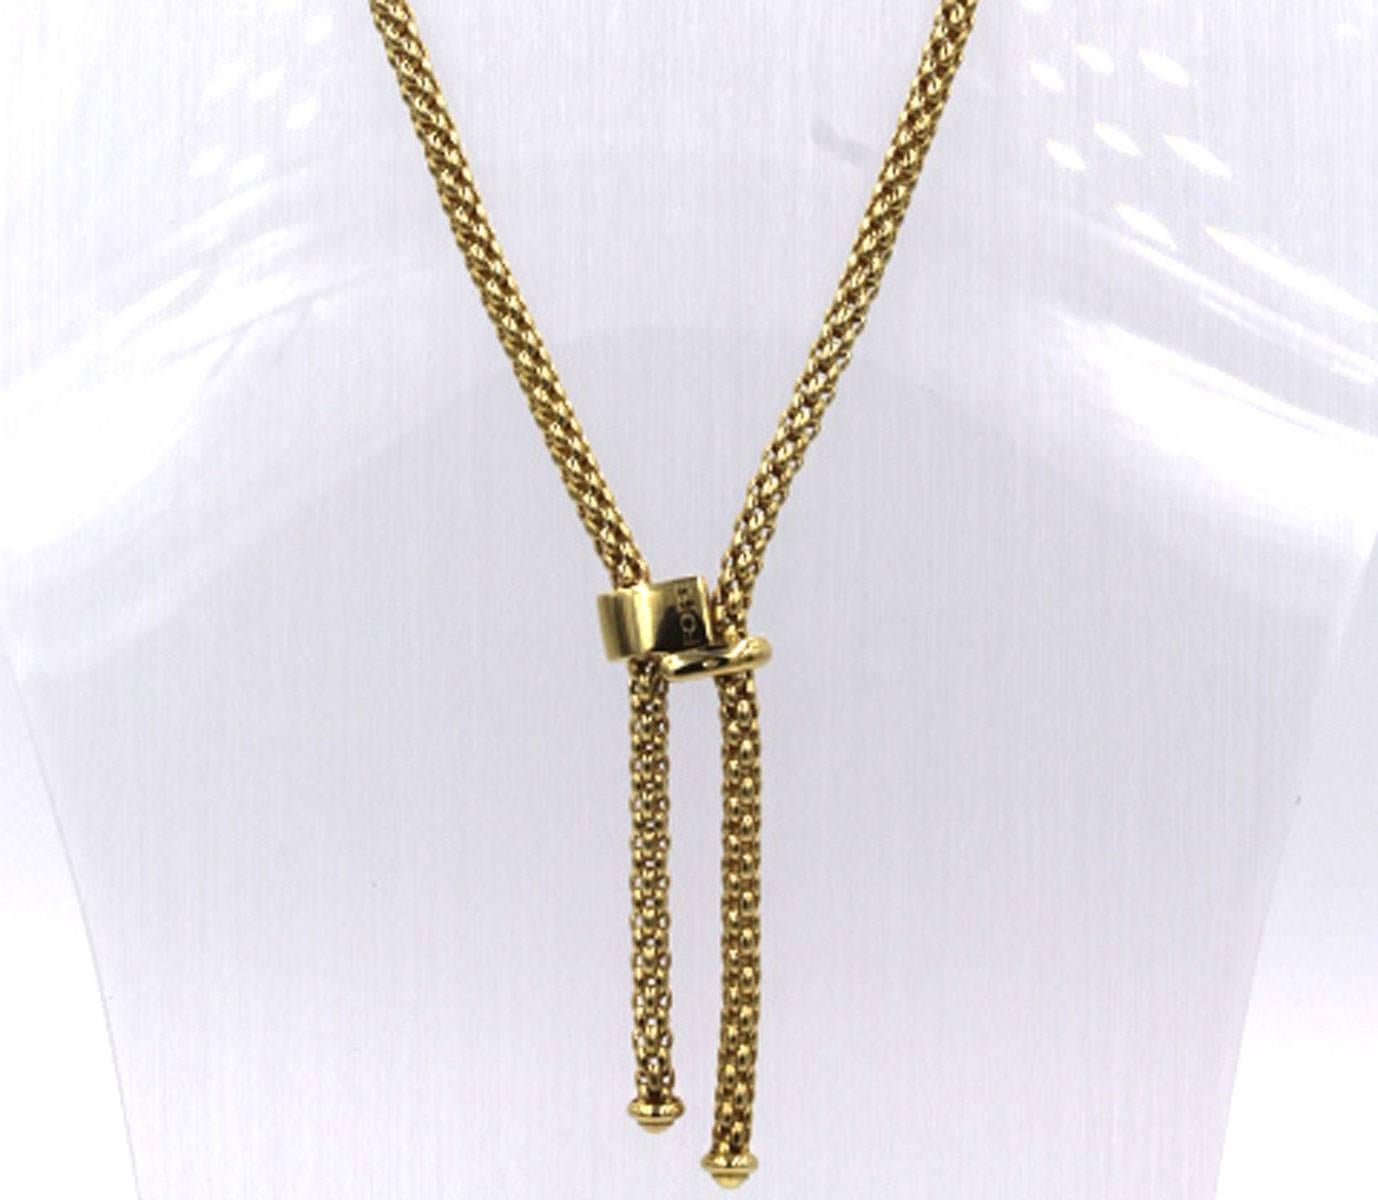 This versatile lariat style necklace by Italian designer Fope is fashioned in 18 karat yellow gold. The necklace measures 16 inches with a 2 inch drop. The clasp is stationary, and the ends are signed Fope. 